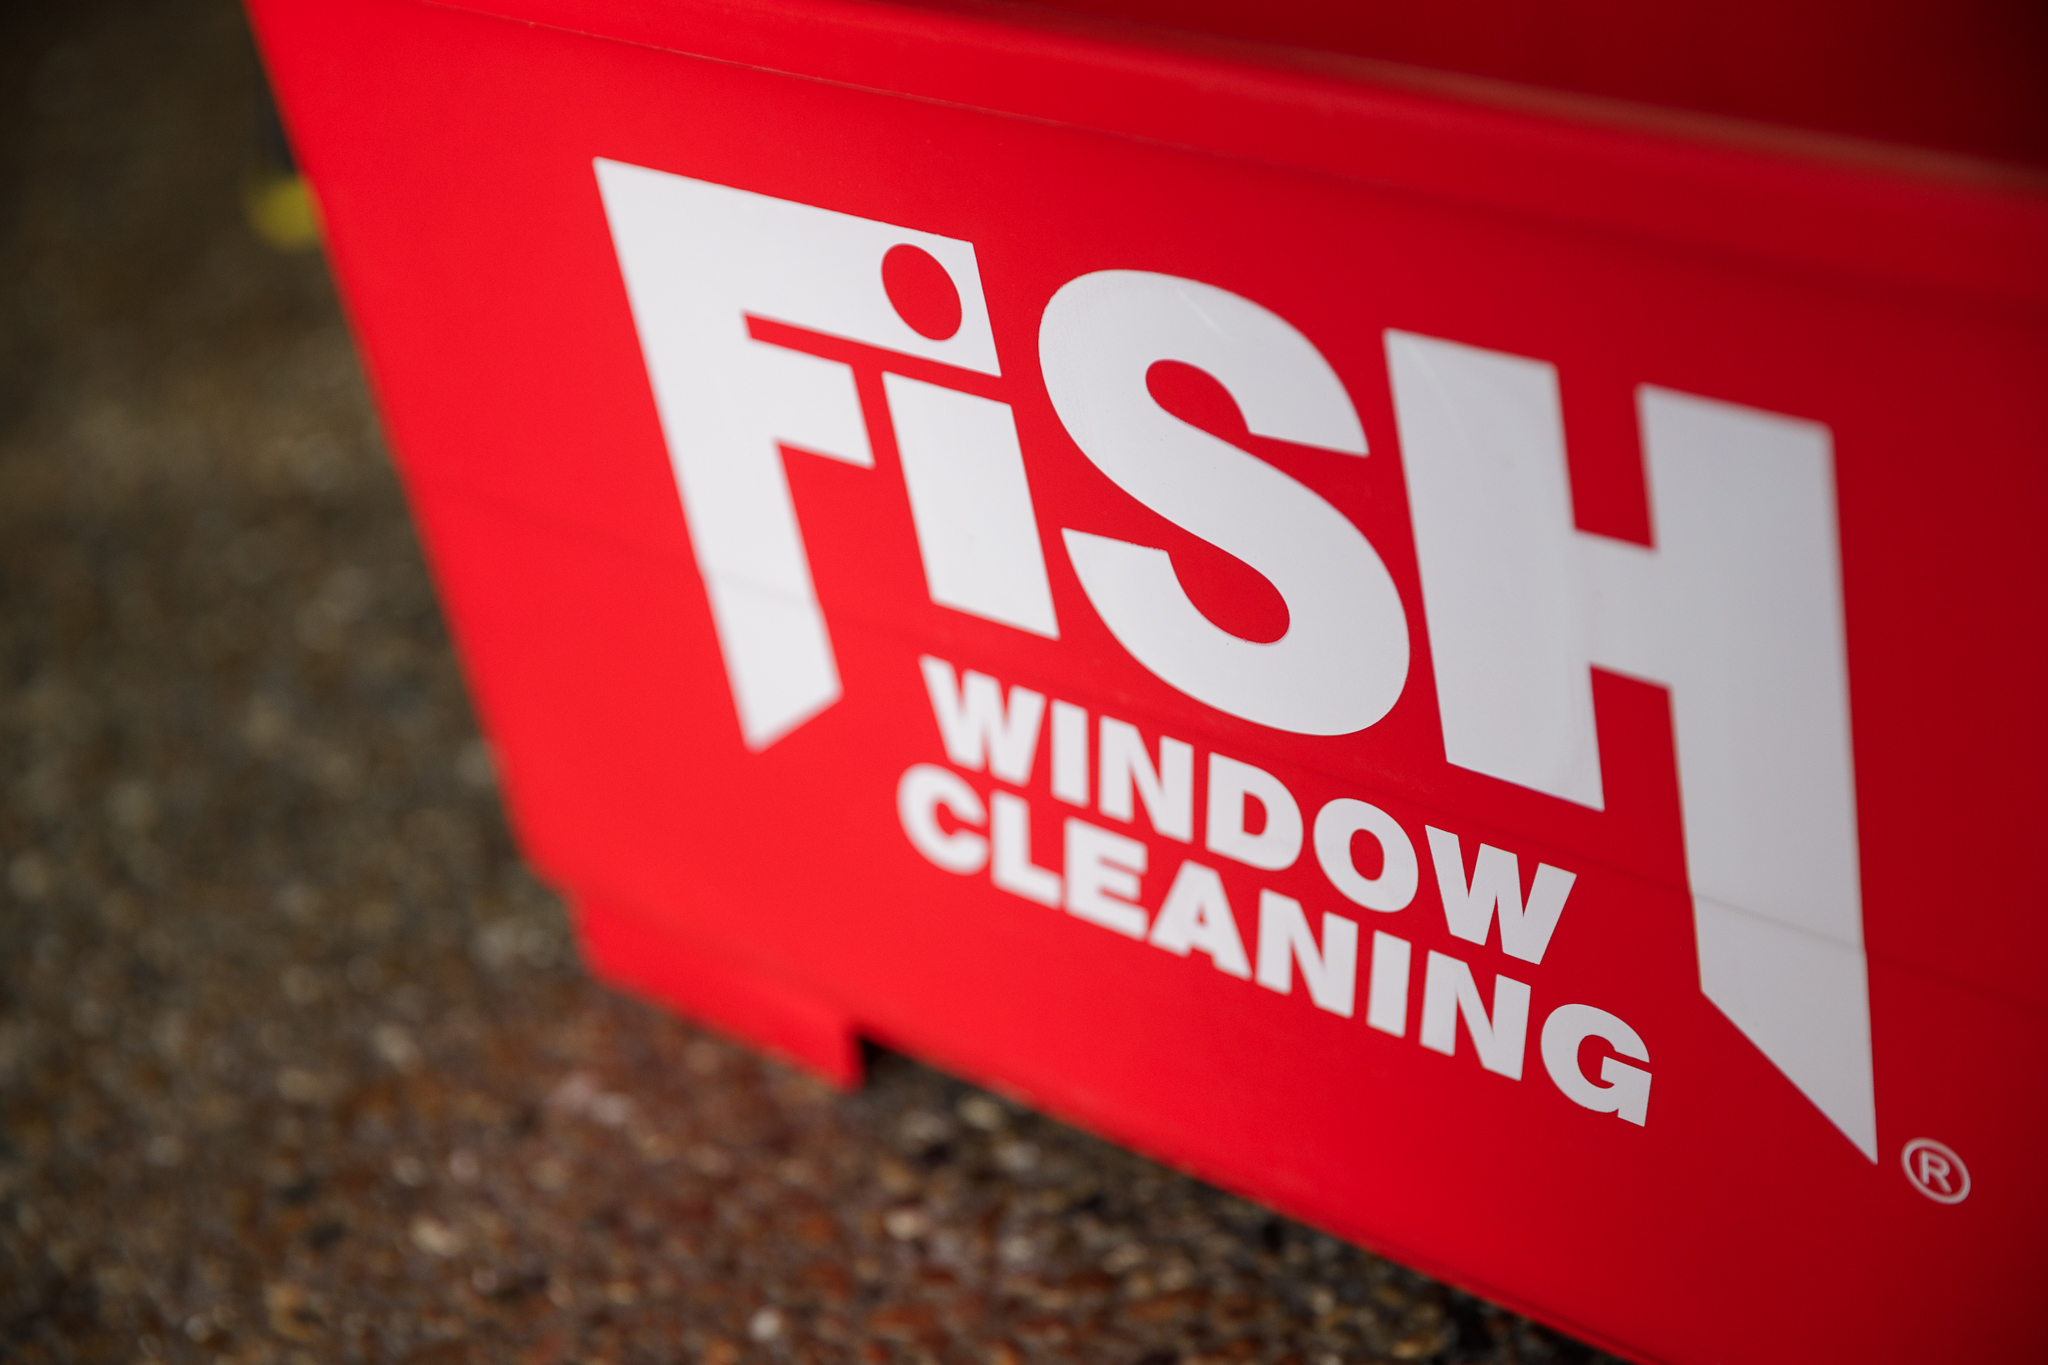 Home - Fish Window Cleaning - Northern Kentucky including Florence, Union,  Hebron, Covington, Newport, Fort Thomas, Independence, Southgate, Cold  Spring, and Tri-State Area